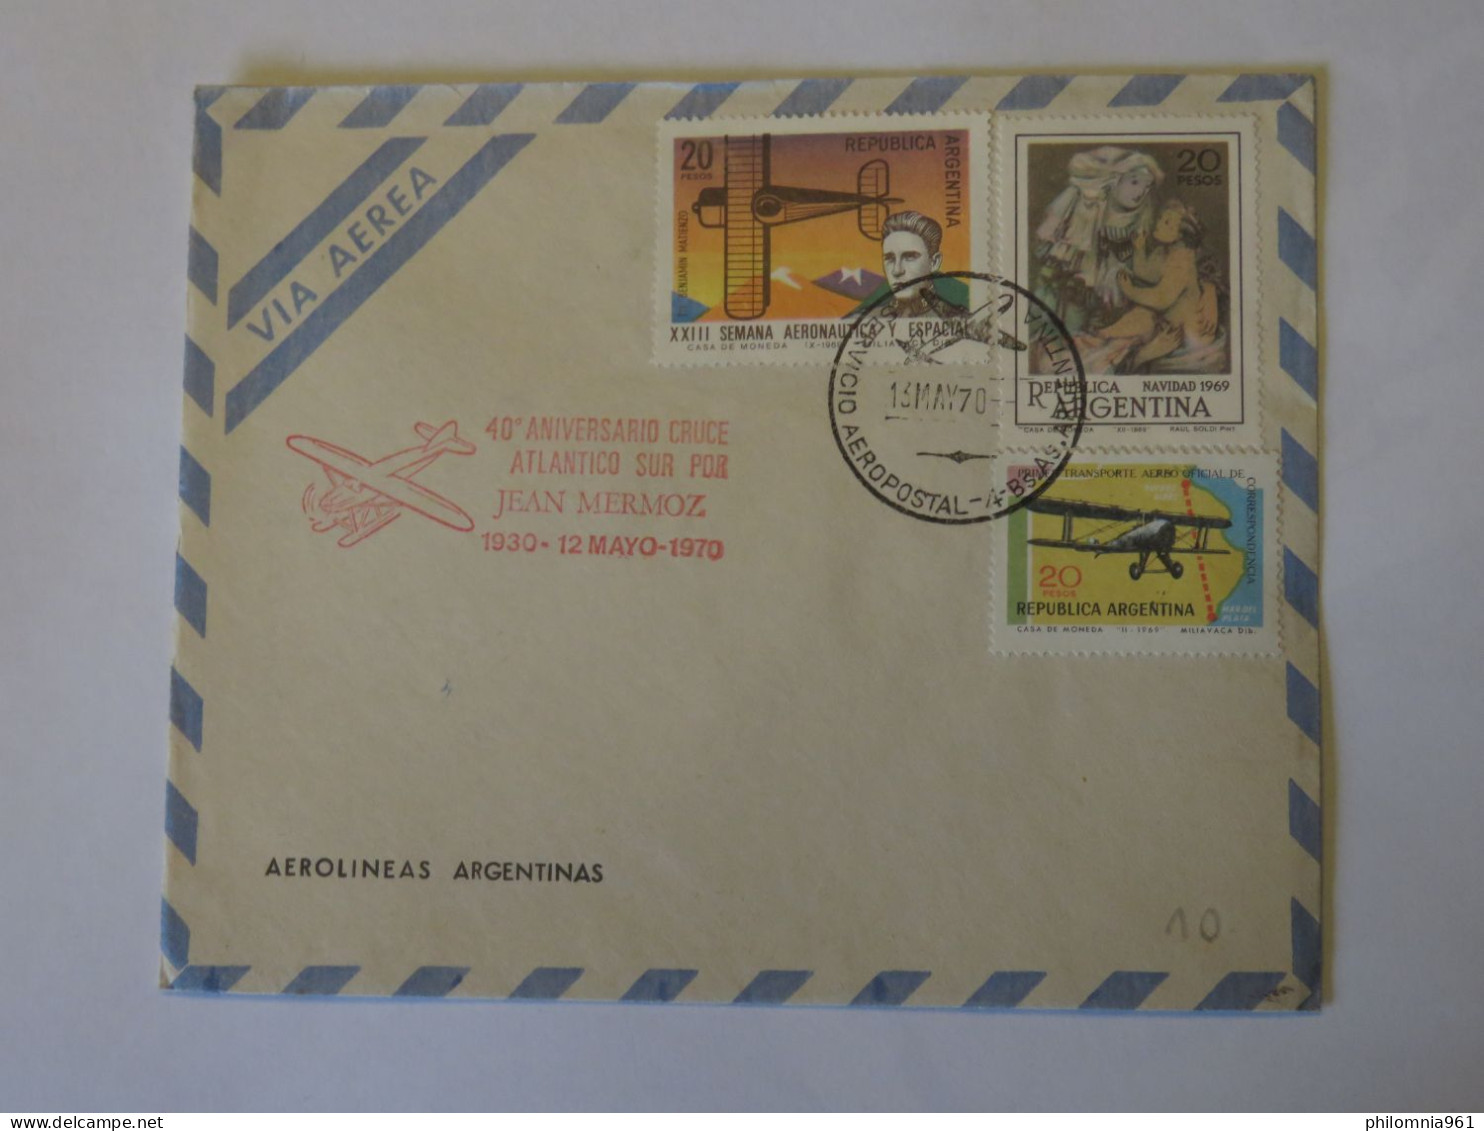 ARGENTINA  40 SOUTH ATLANTIC CROSSING ANNIVERSARY BY JEAN MERMOZ FLIGHT  FIRST FLIGHT COVER 1970 - Usados